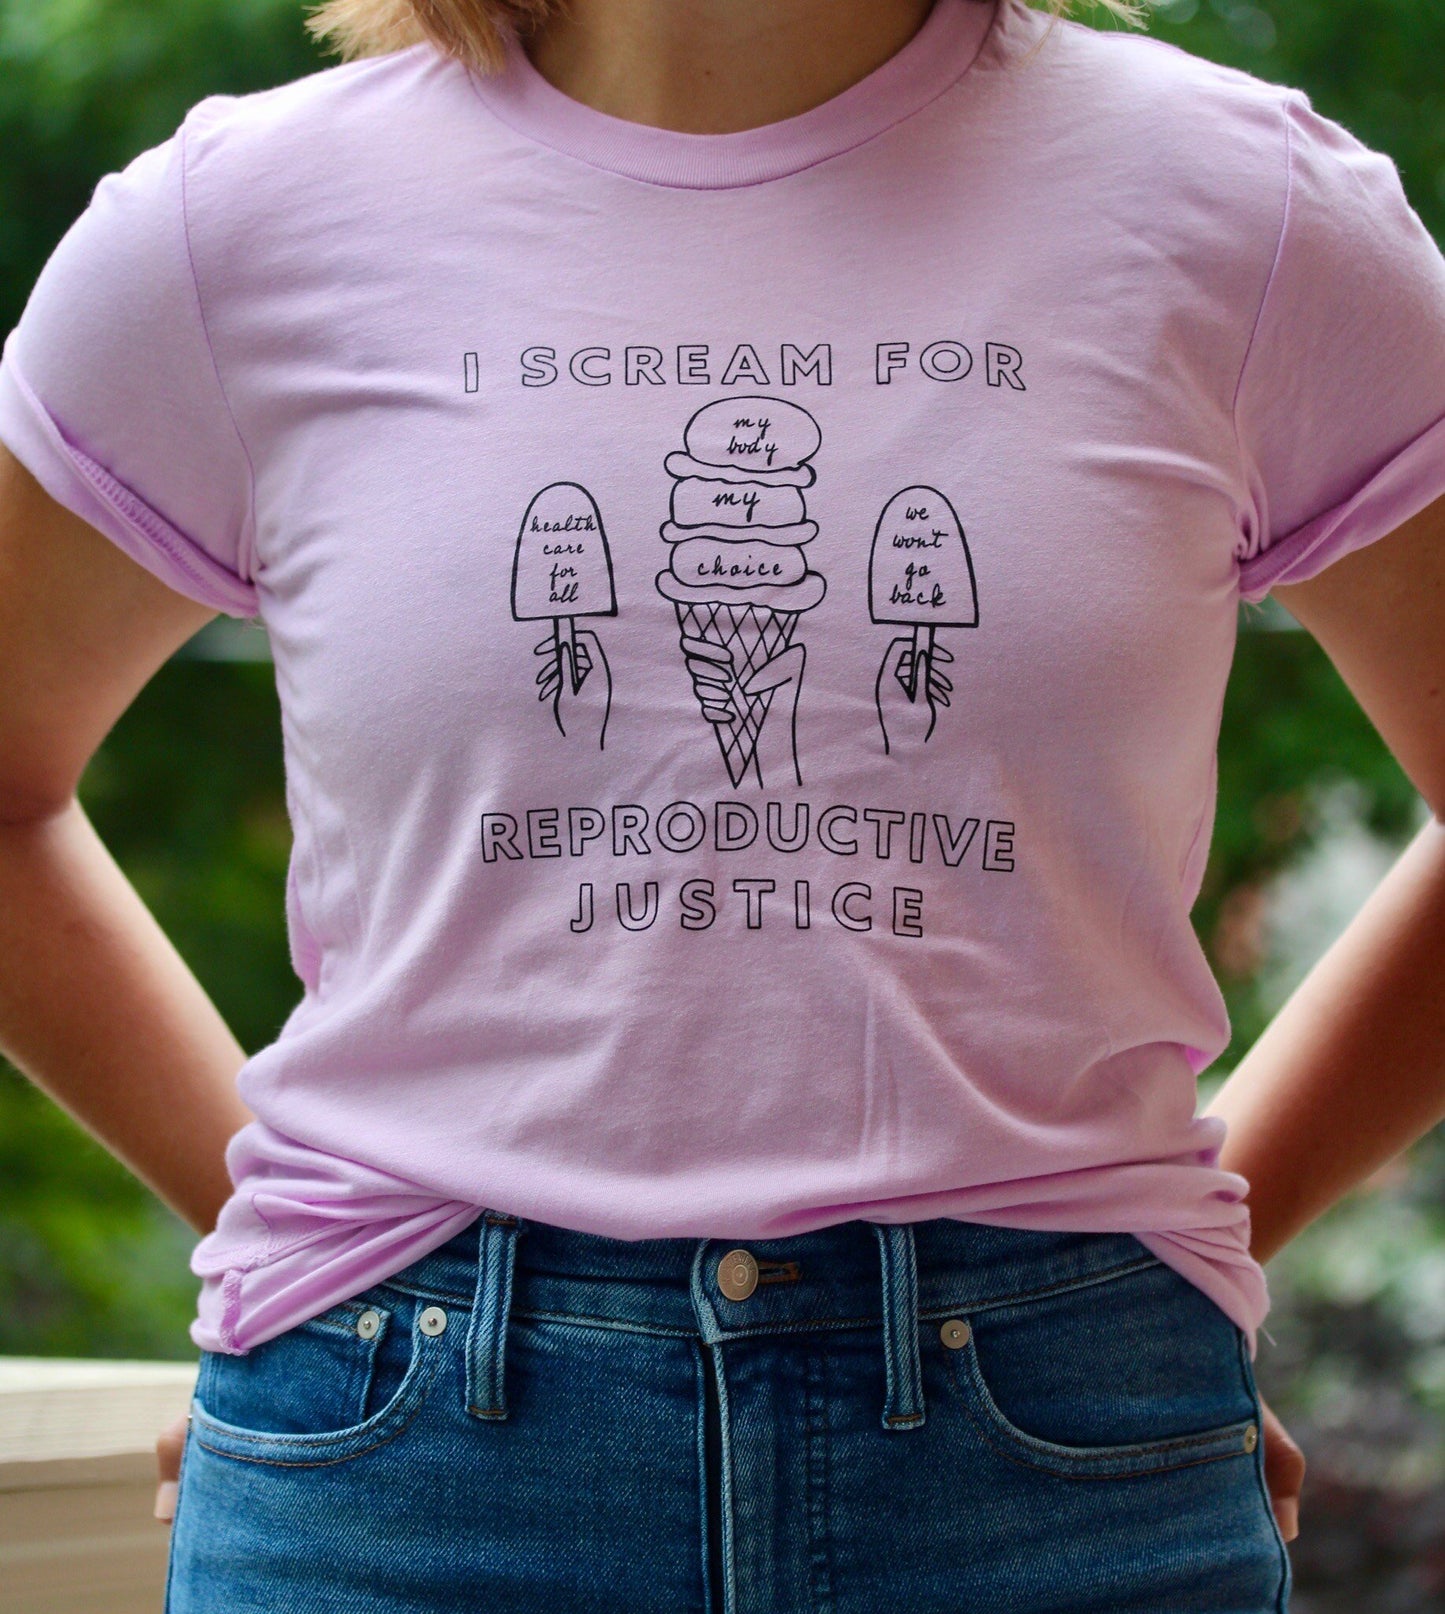 A woman wears a lilac "I Scream for Reproductive Justice" tee with jeans